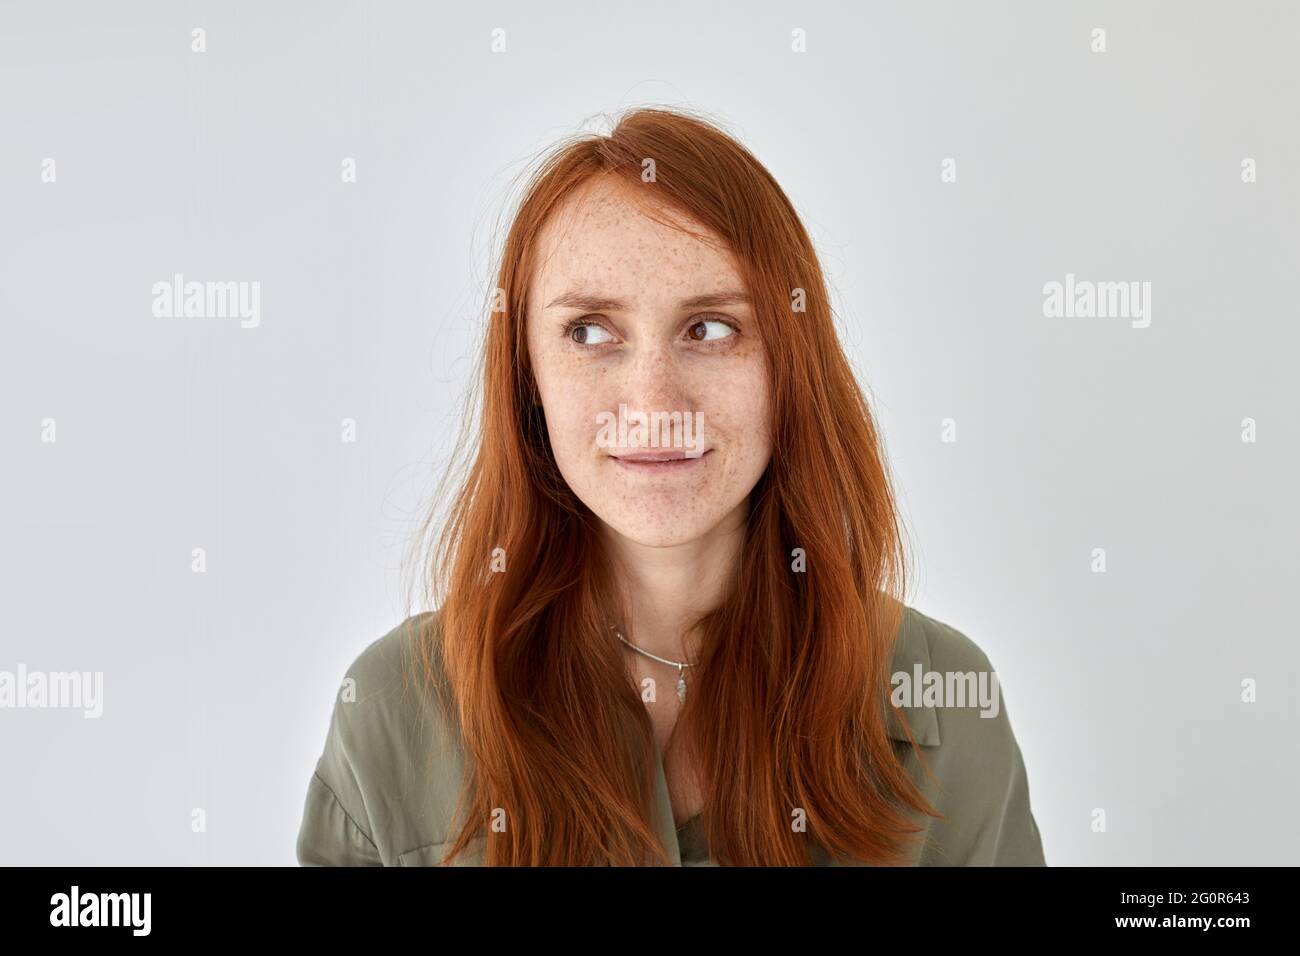 Portrait of glad female with ginger hair and freckles standing on white background and looking away Stock Photo